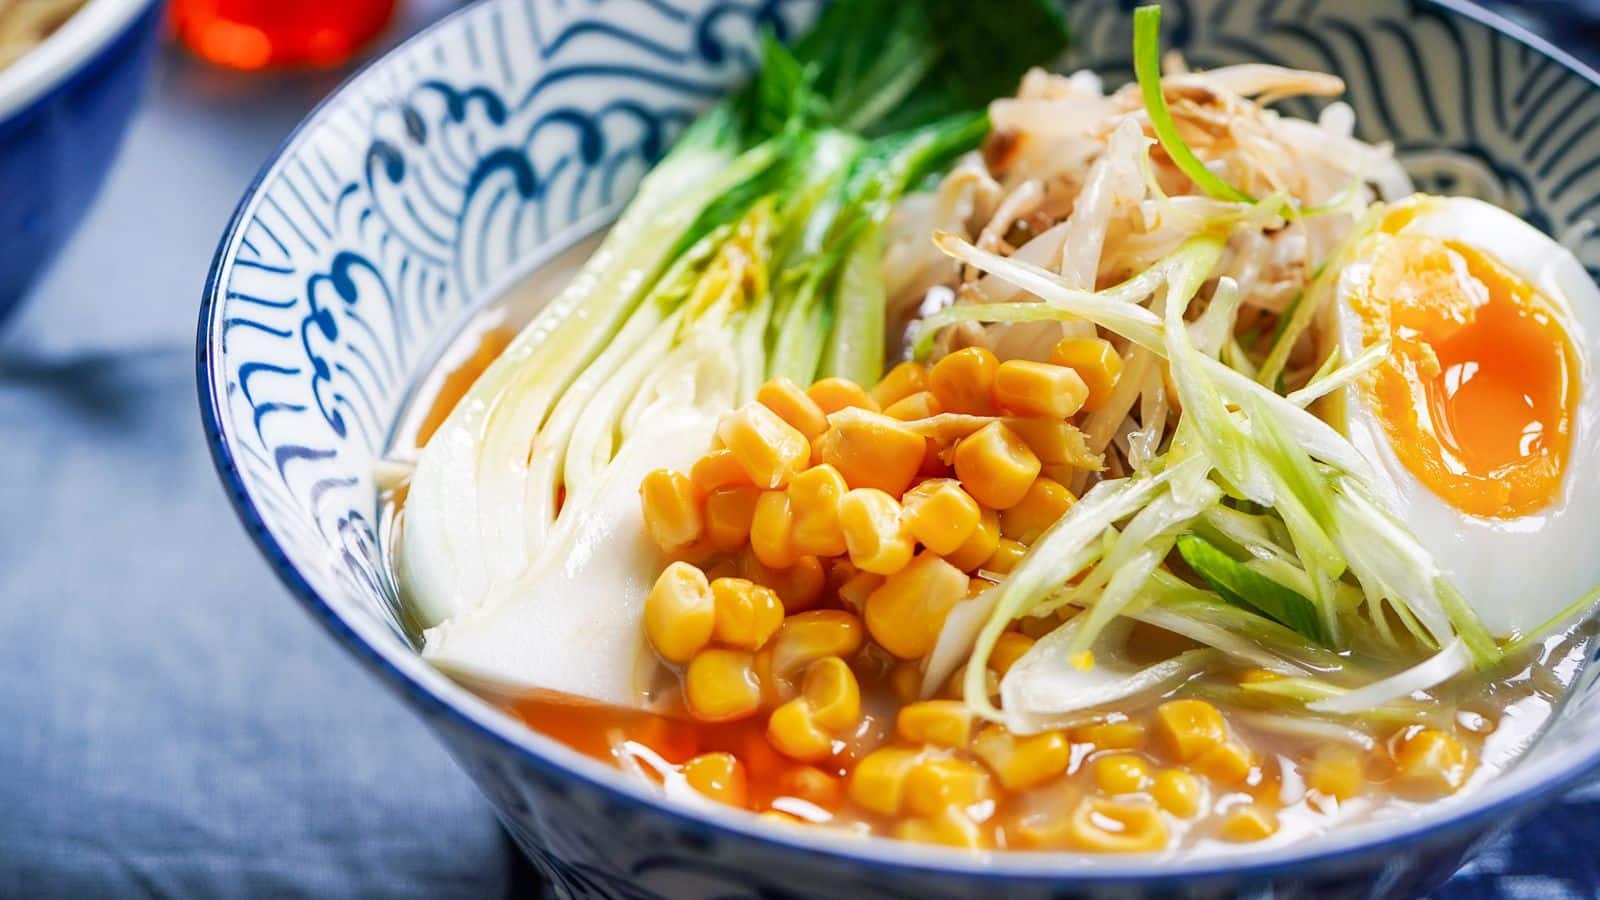 Guests coming over? Serve this Japanese miso ramen